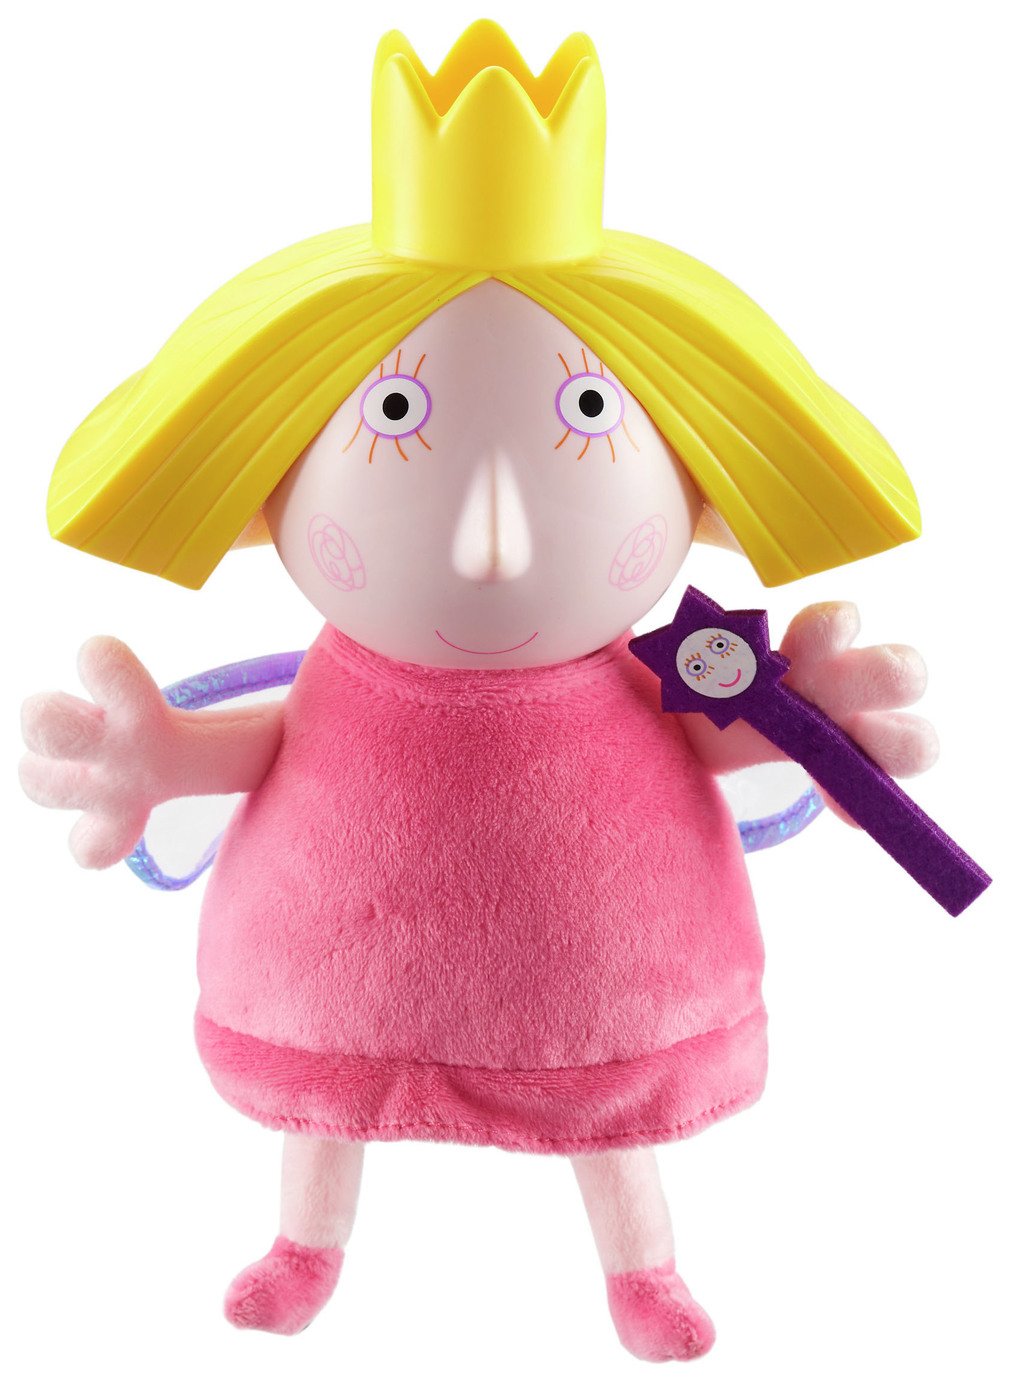 Ben & Holly Glow Friend review